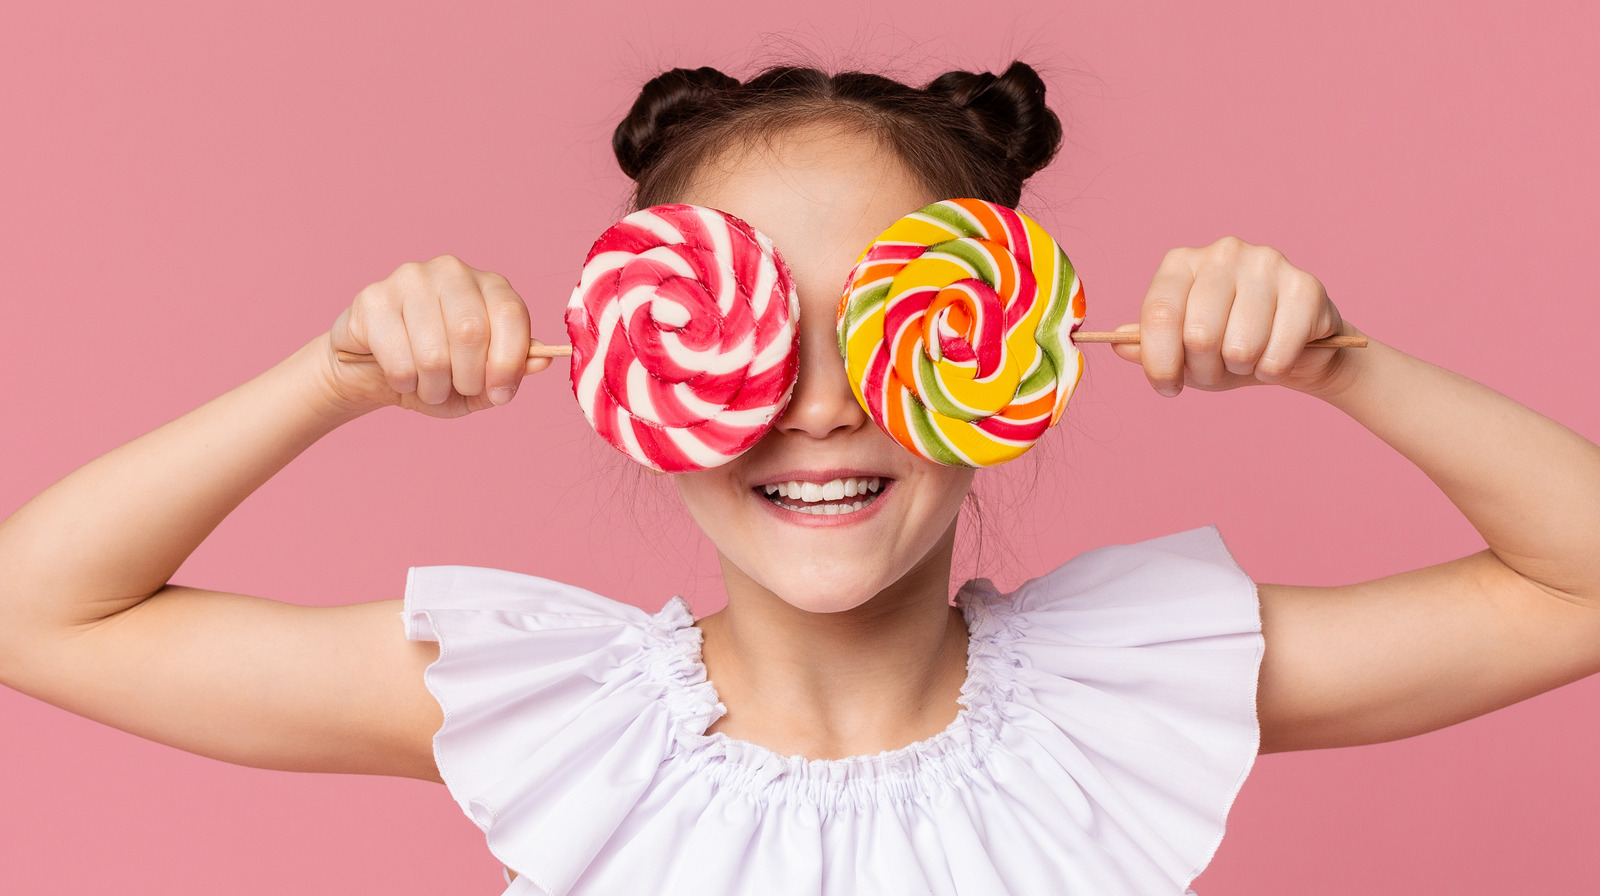 The Surprising Place The Name Lollipop Actually Came From